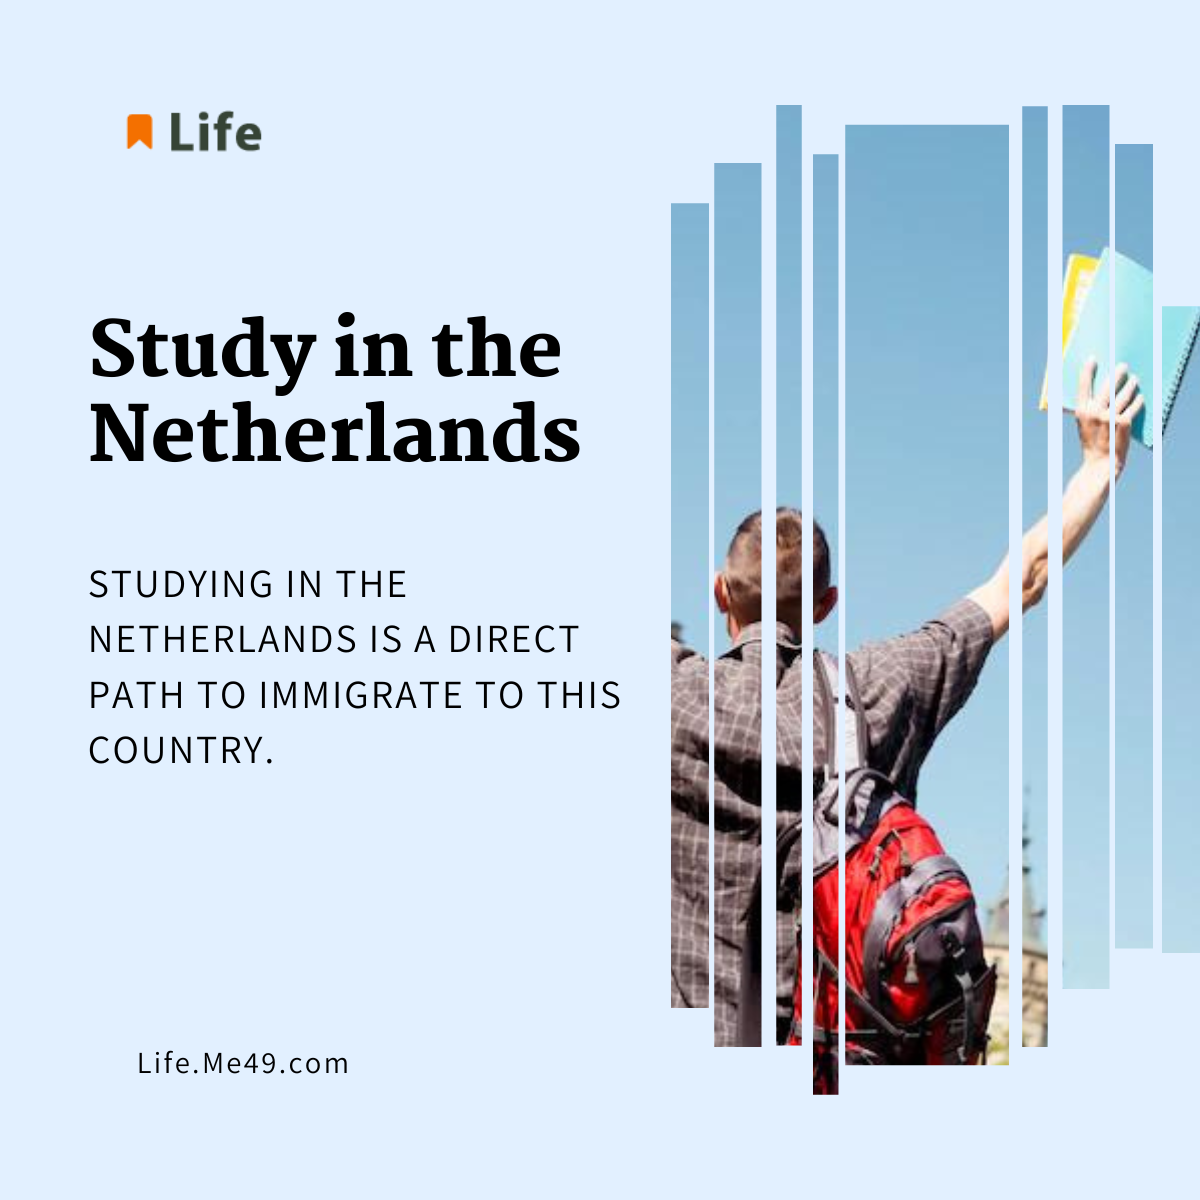 Studying in the Netherlands